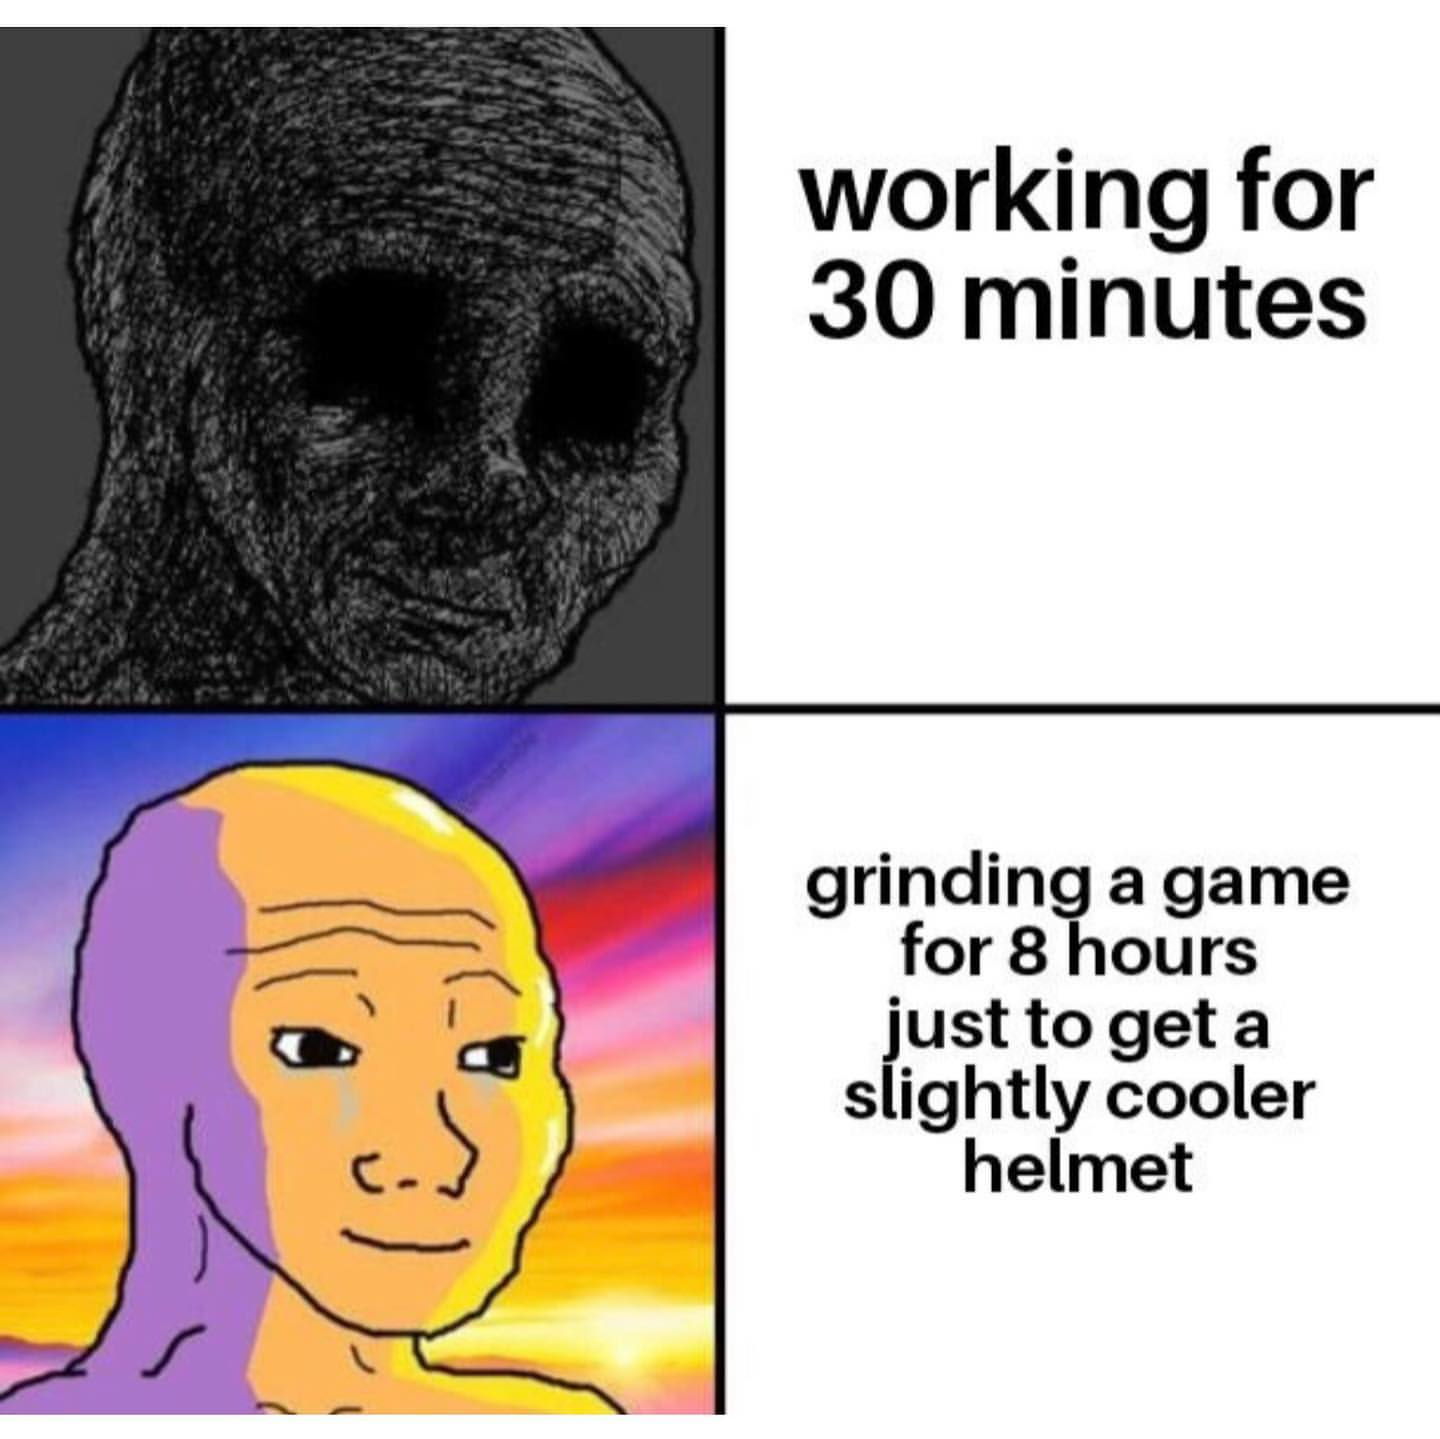 funny memes - dick memes - working for 30 minutes grinding a game for 8 hours just to get a slightly cooler helmet